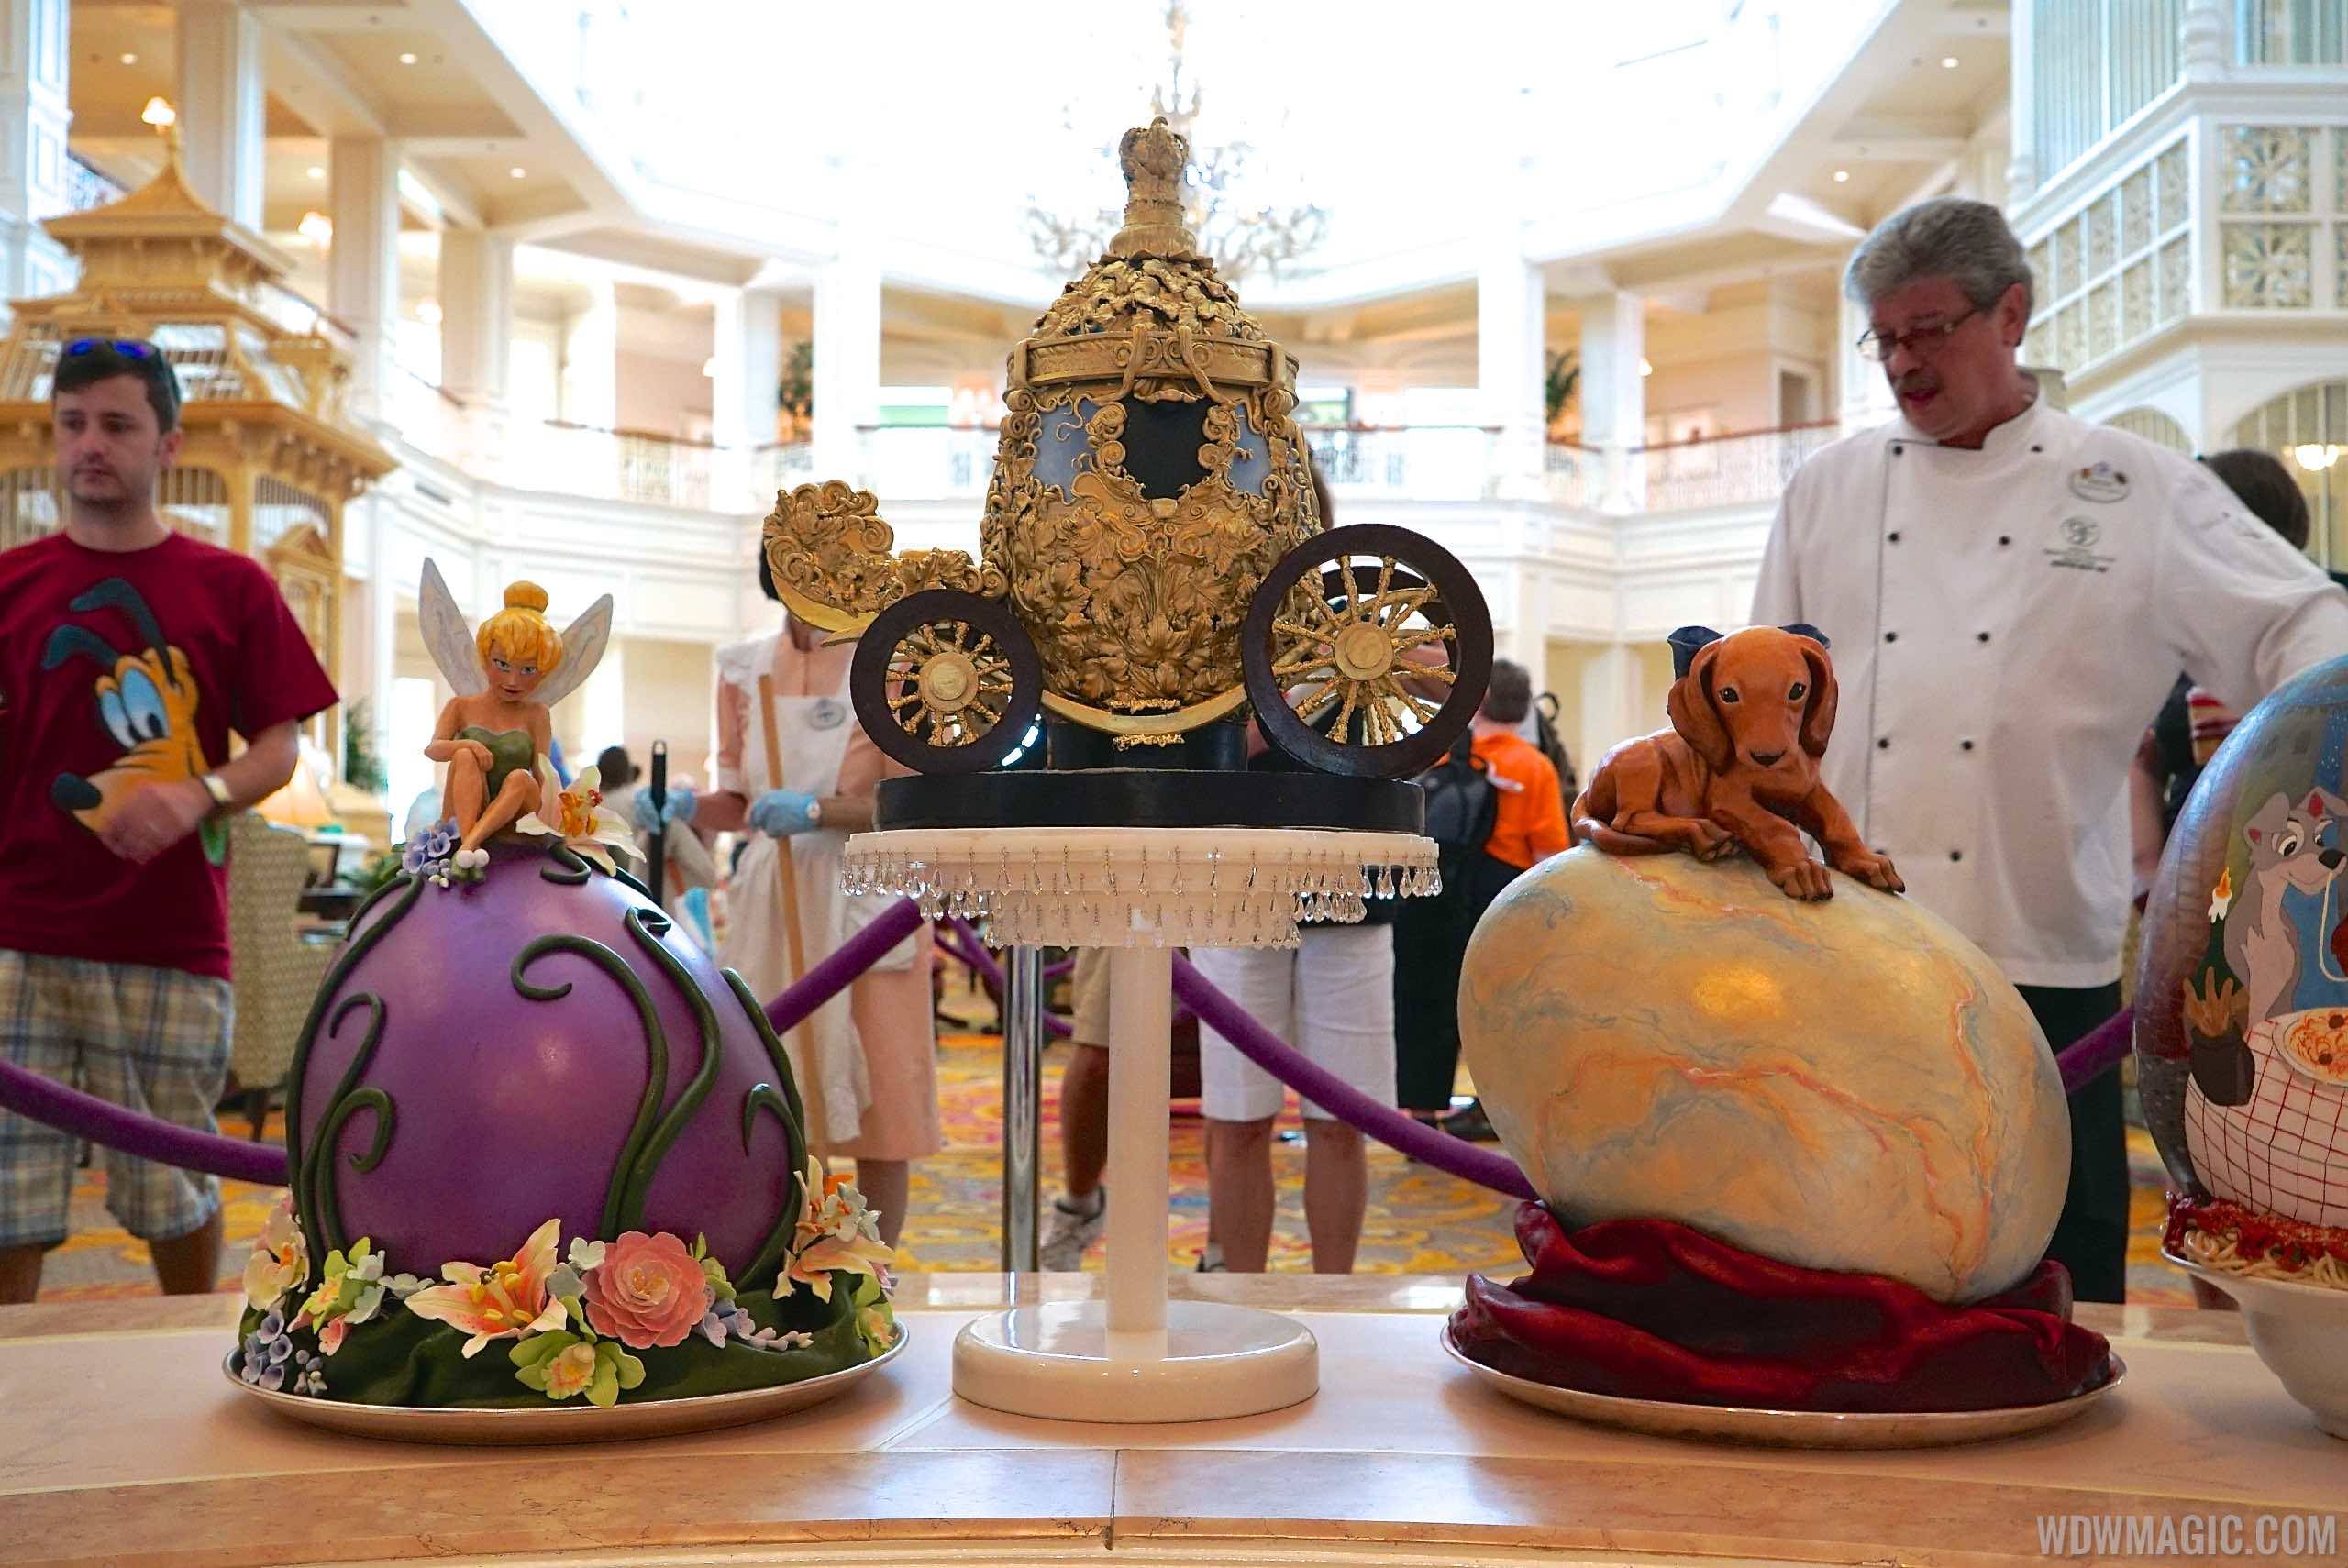 PHOTOS - Easter Egg creations now on display at Disney's Grand Floridian Resort